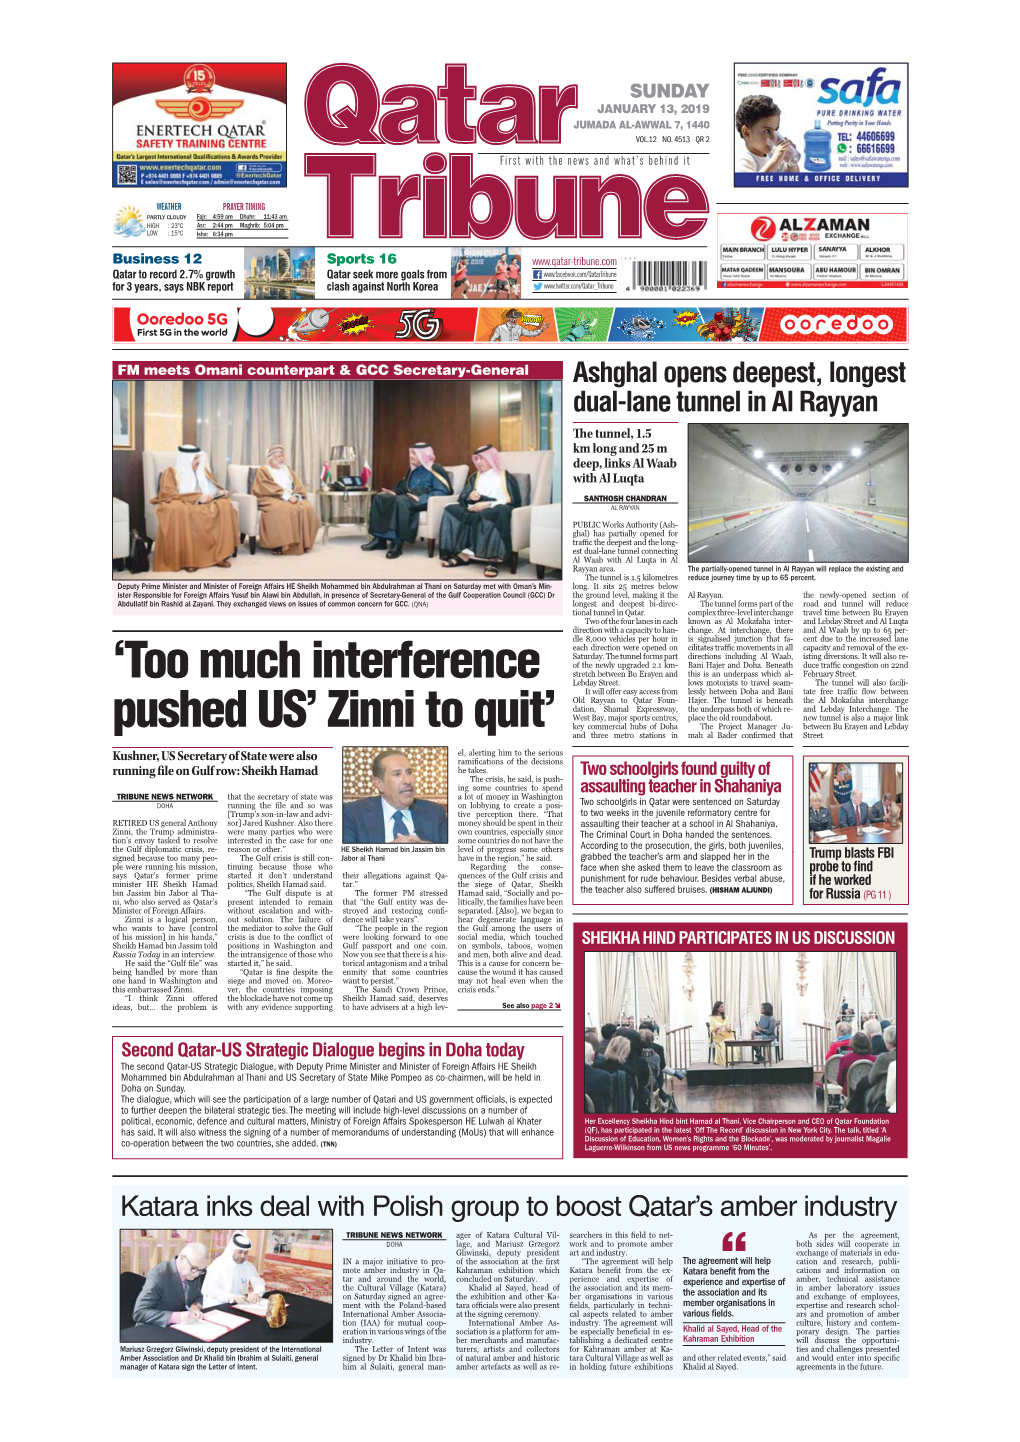 'Too Much Interference Pushed US' Zinni to Quit'